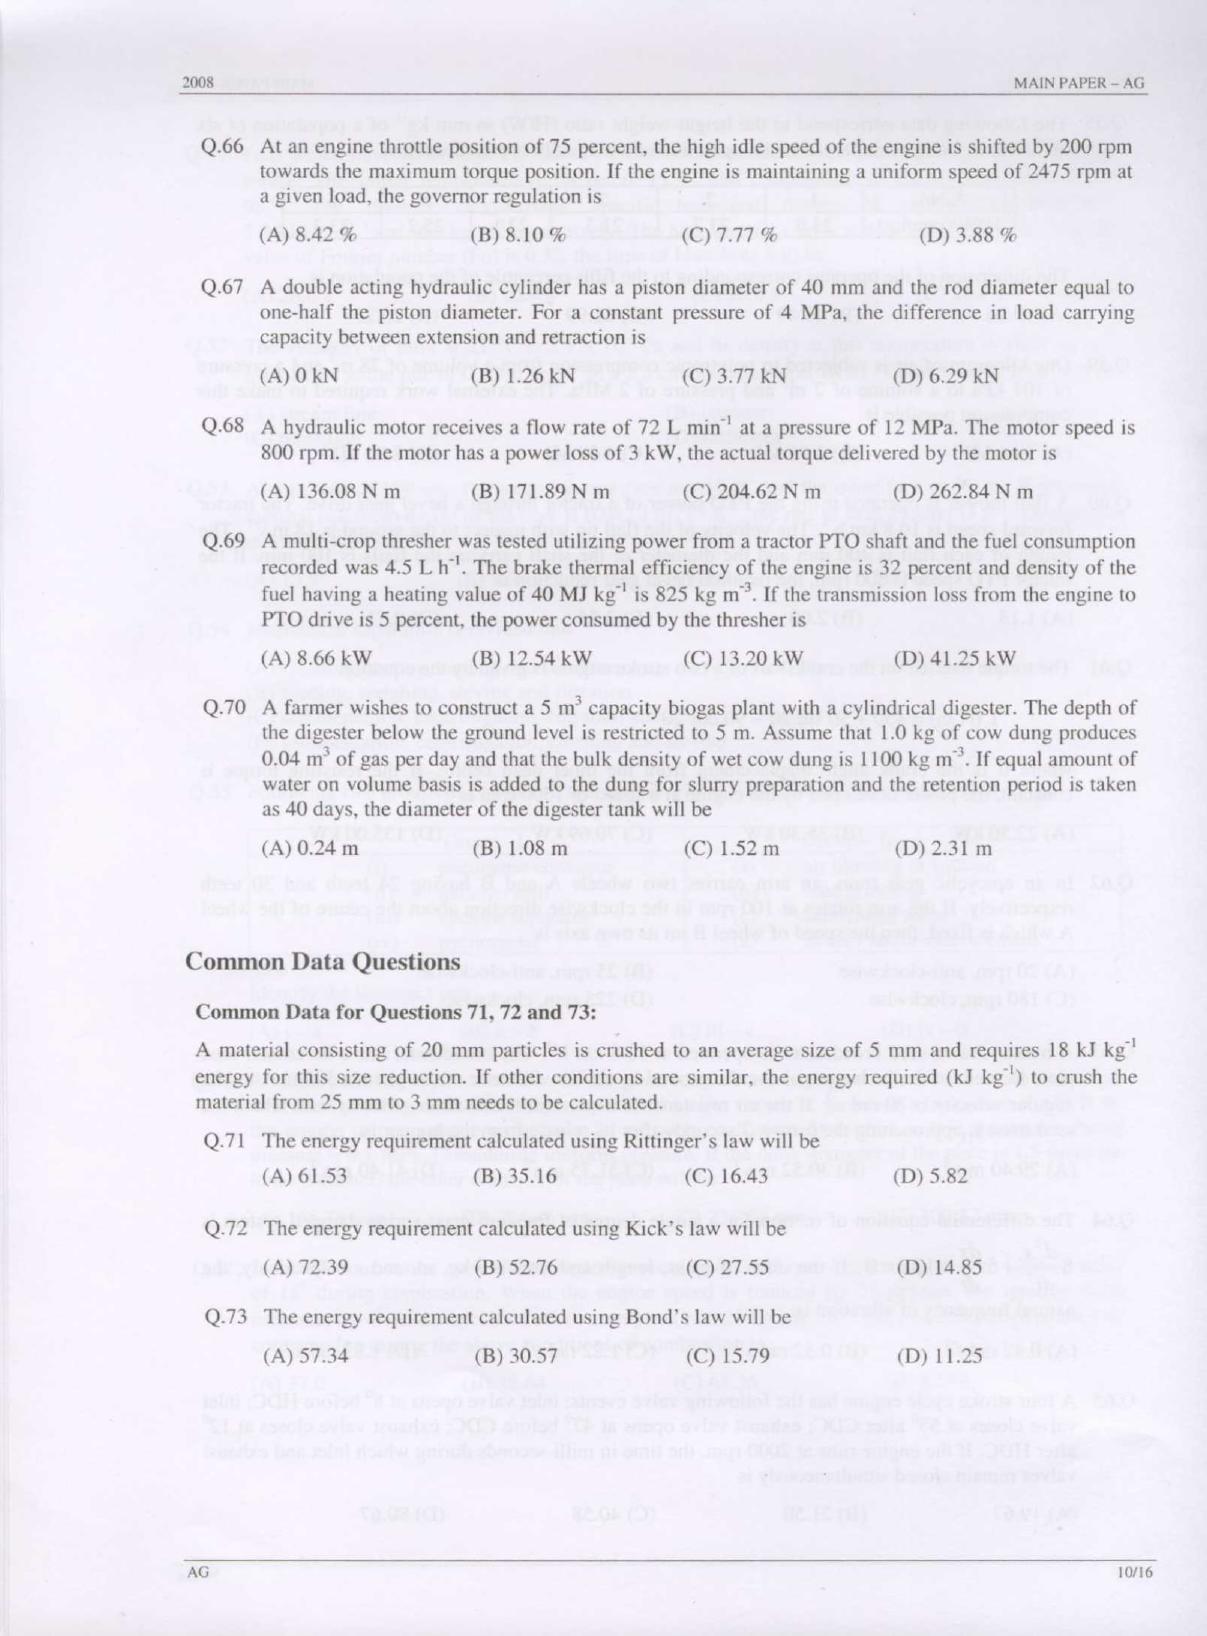 GATE 2008 Agricultural Engineering (AG) Question Paper with Answer Key - Page 10